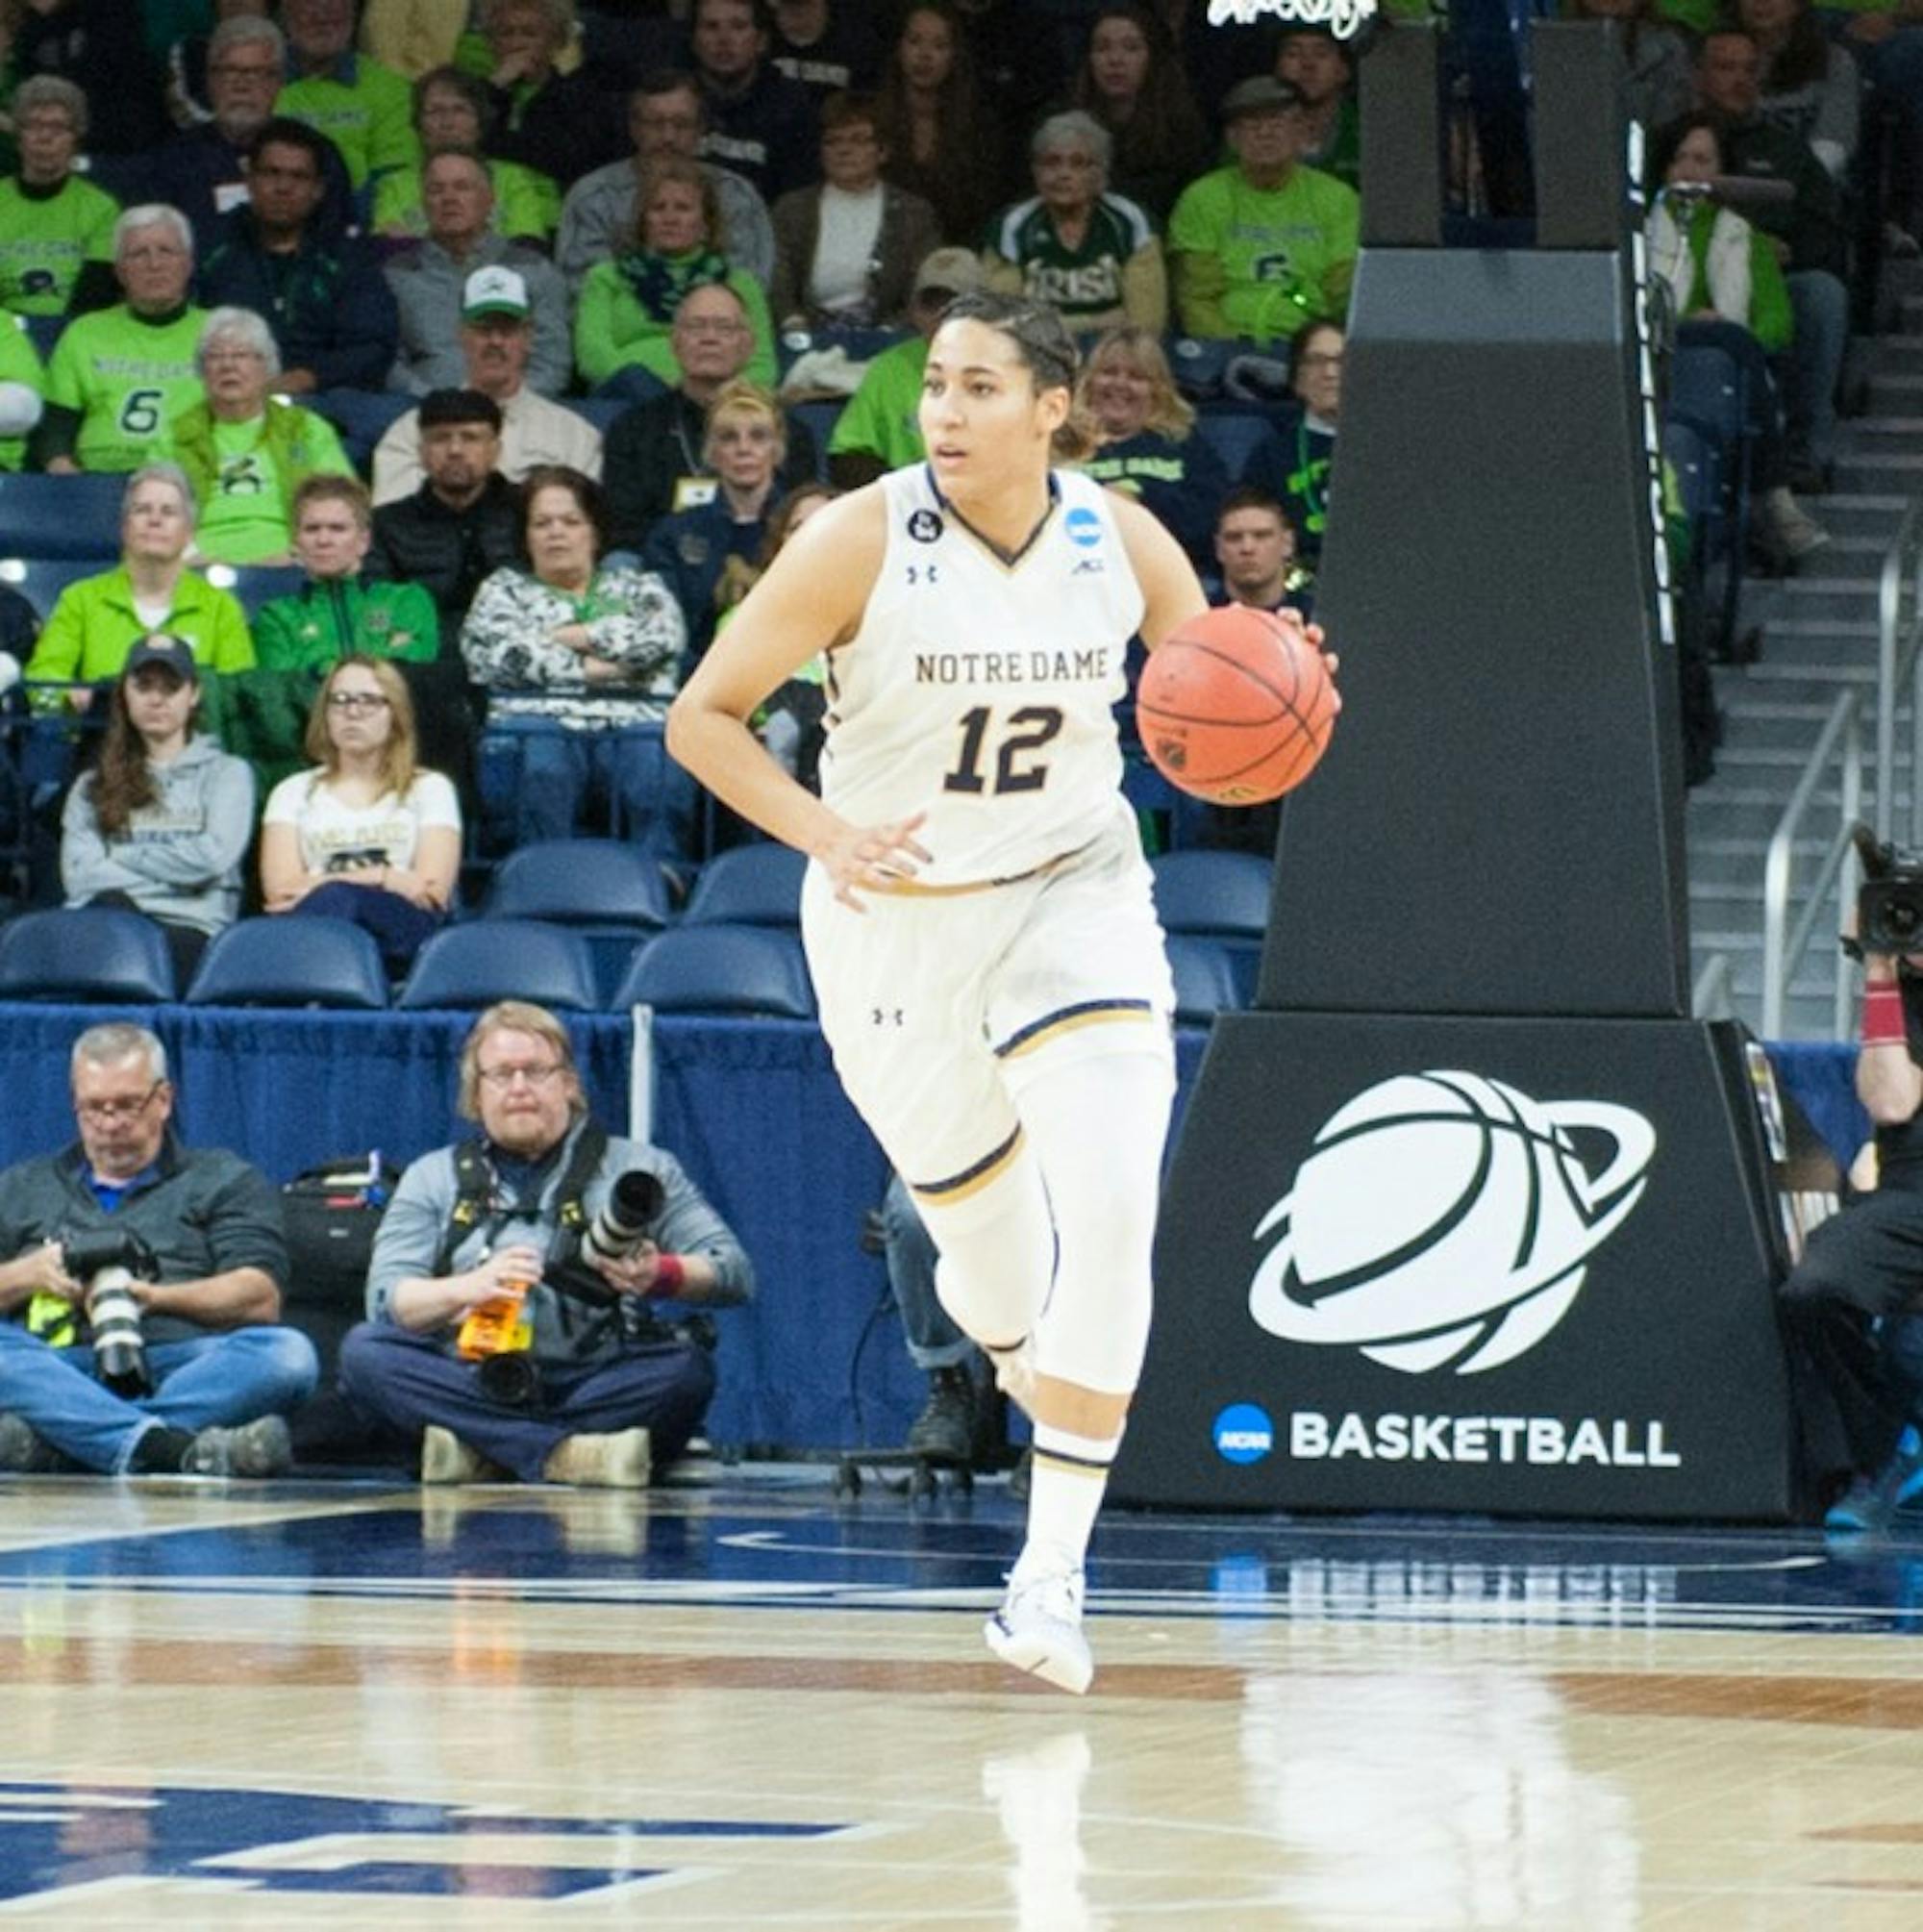 Irish sophomore forward Taya Reimer brings the ball up the court during Notre Dame's 79-67 win over DePaul on Sunday at Purcell Pavilion.